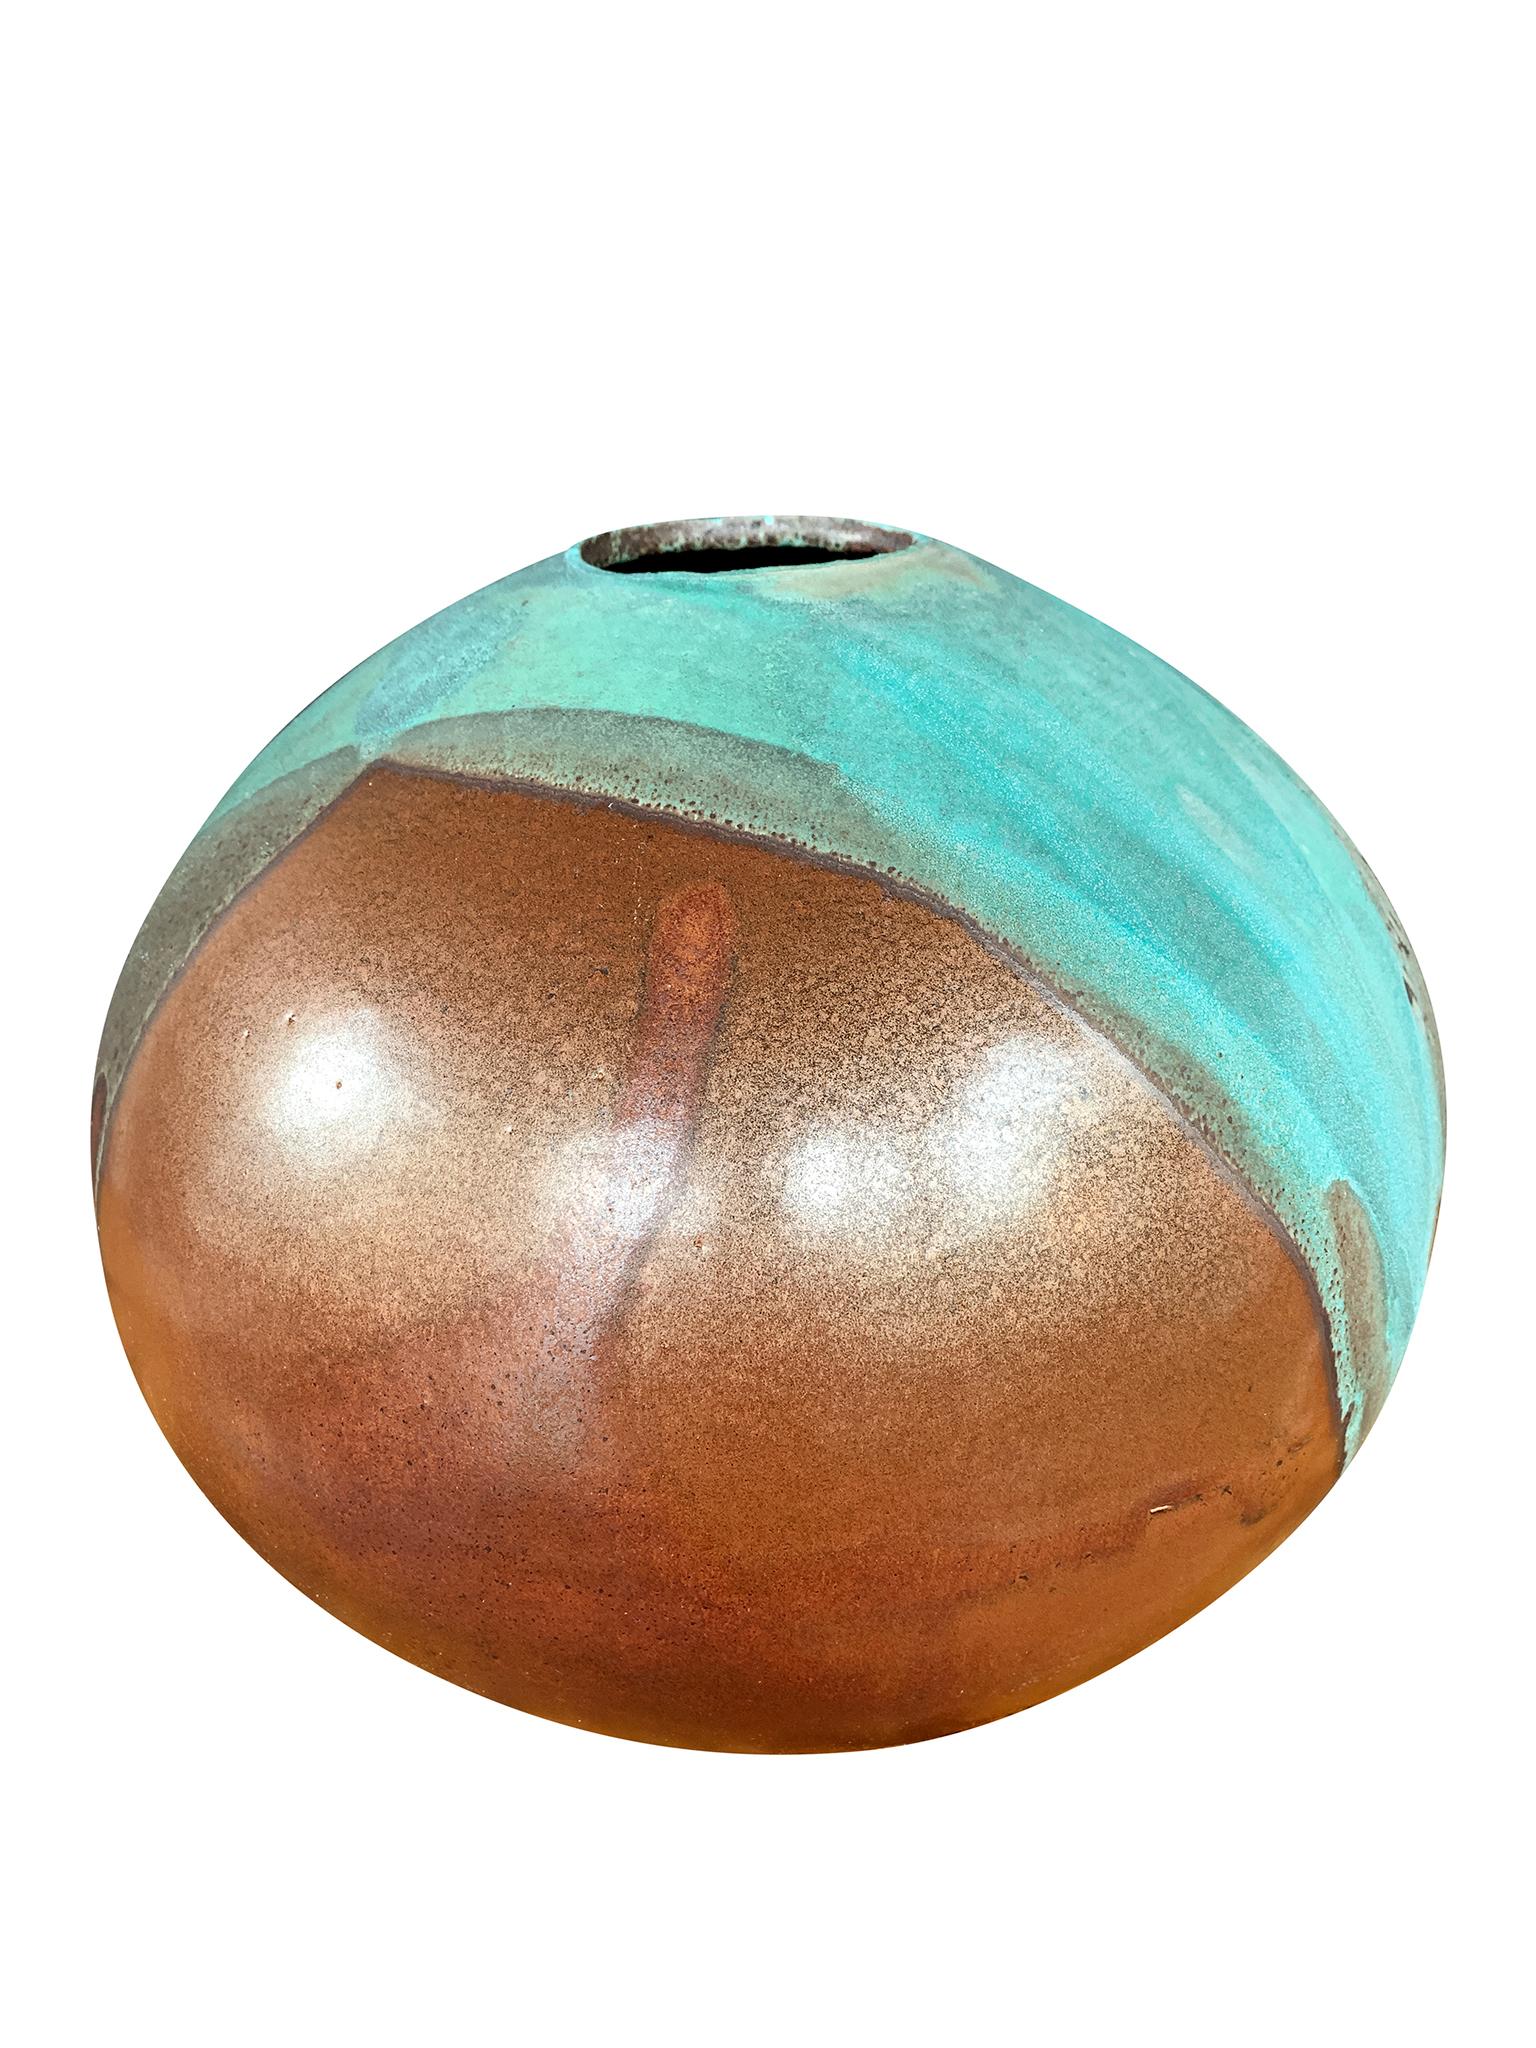 American Thom Lussier Ceramic Vessel #2, from the Oxidized Copper Collection For Sale